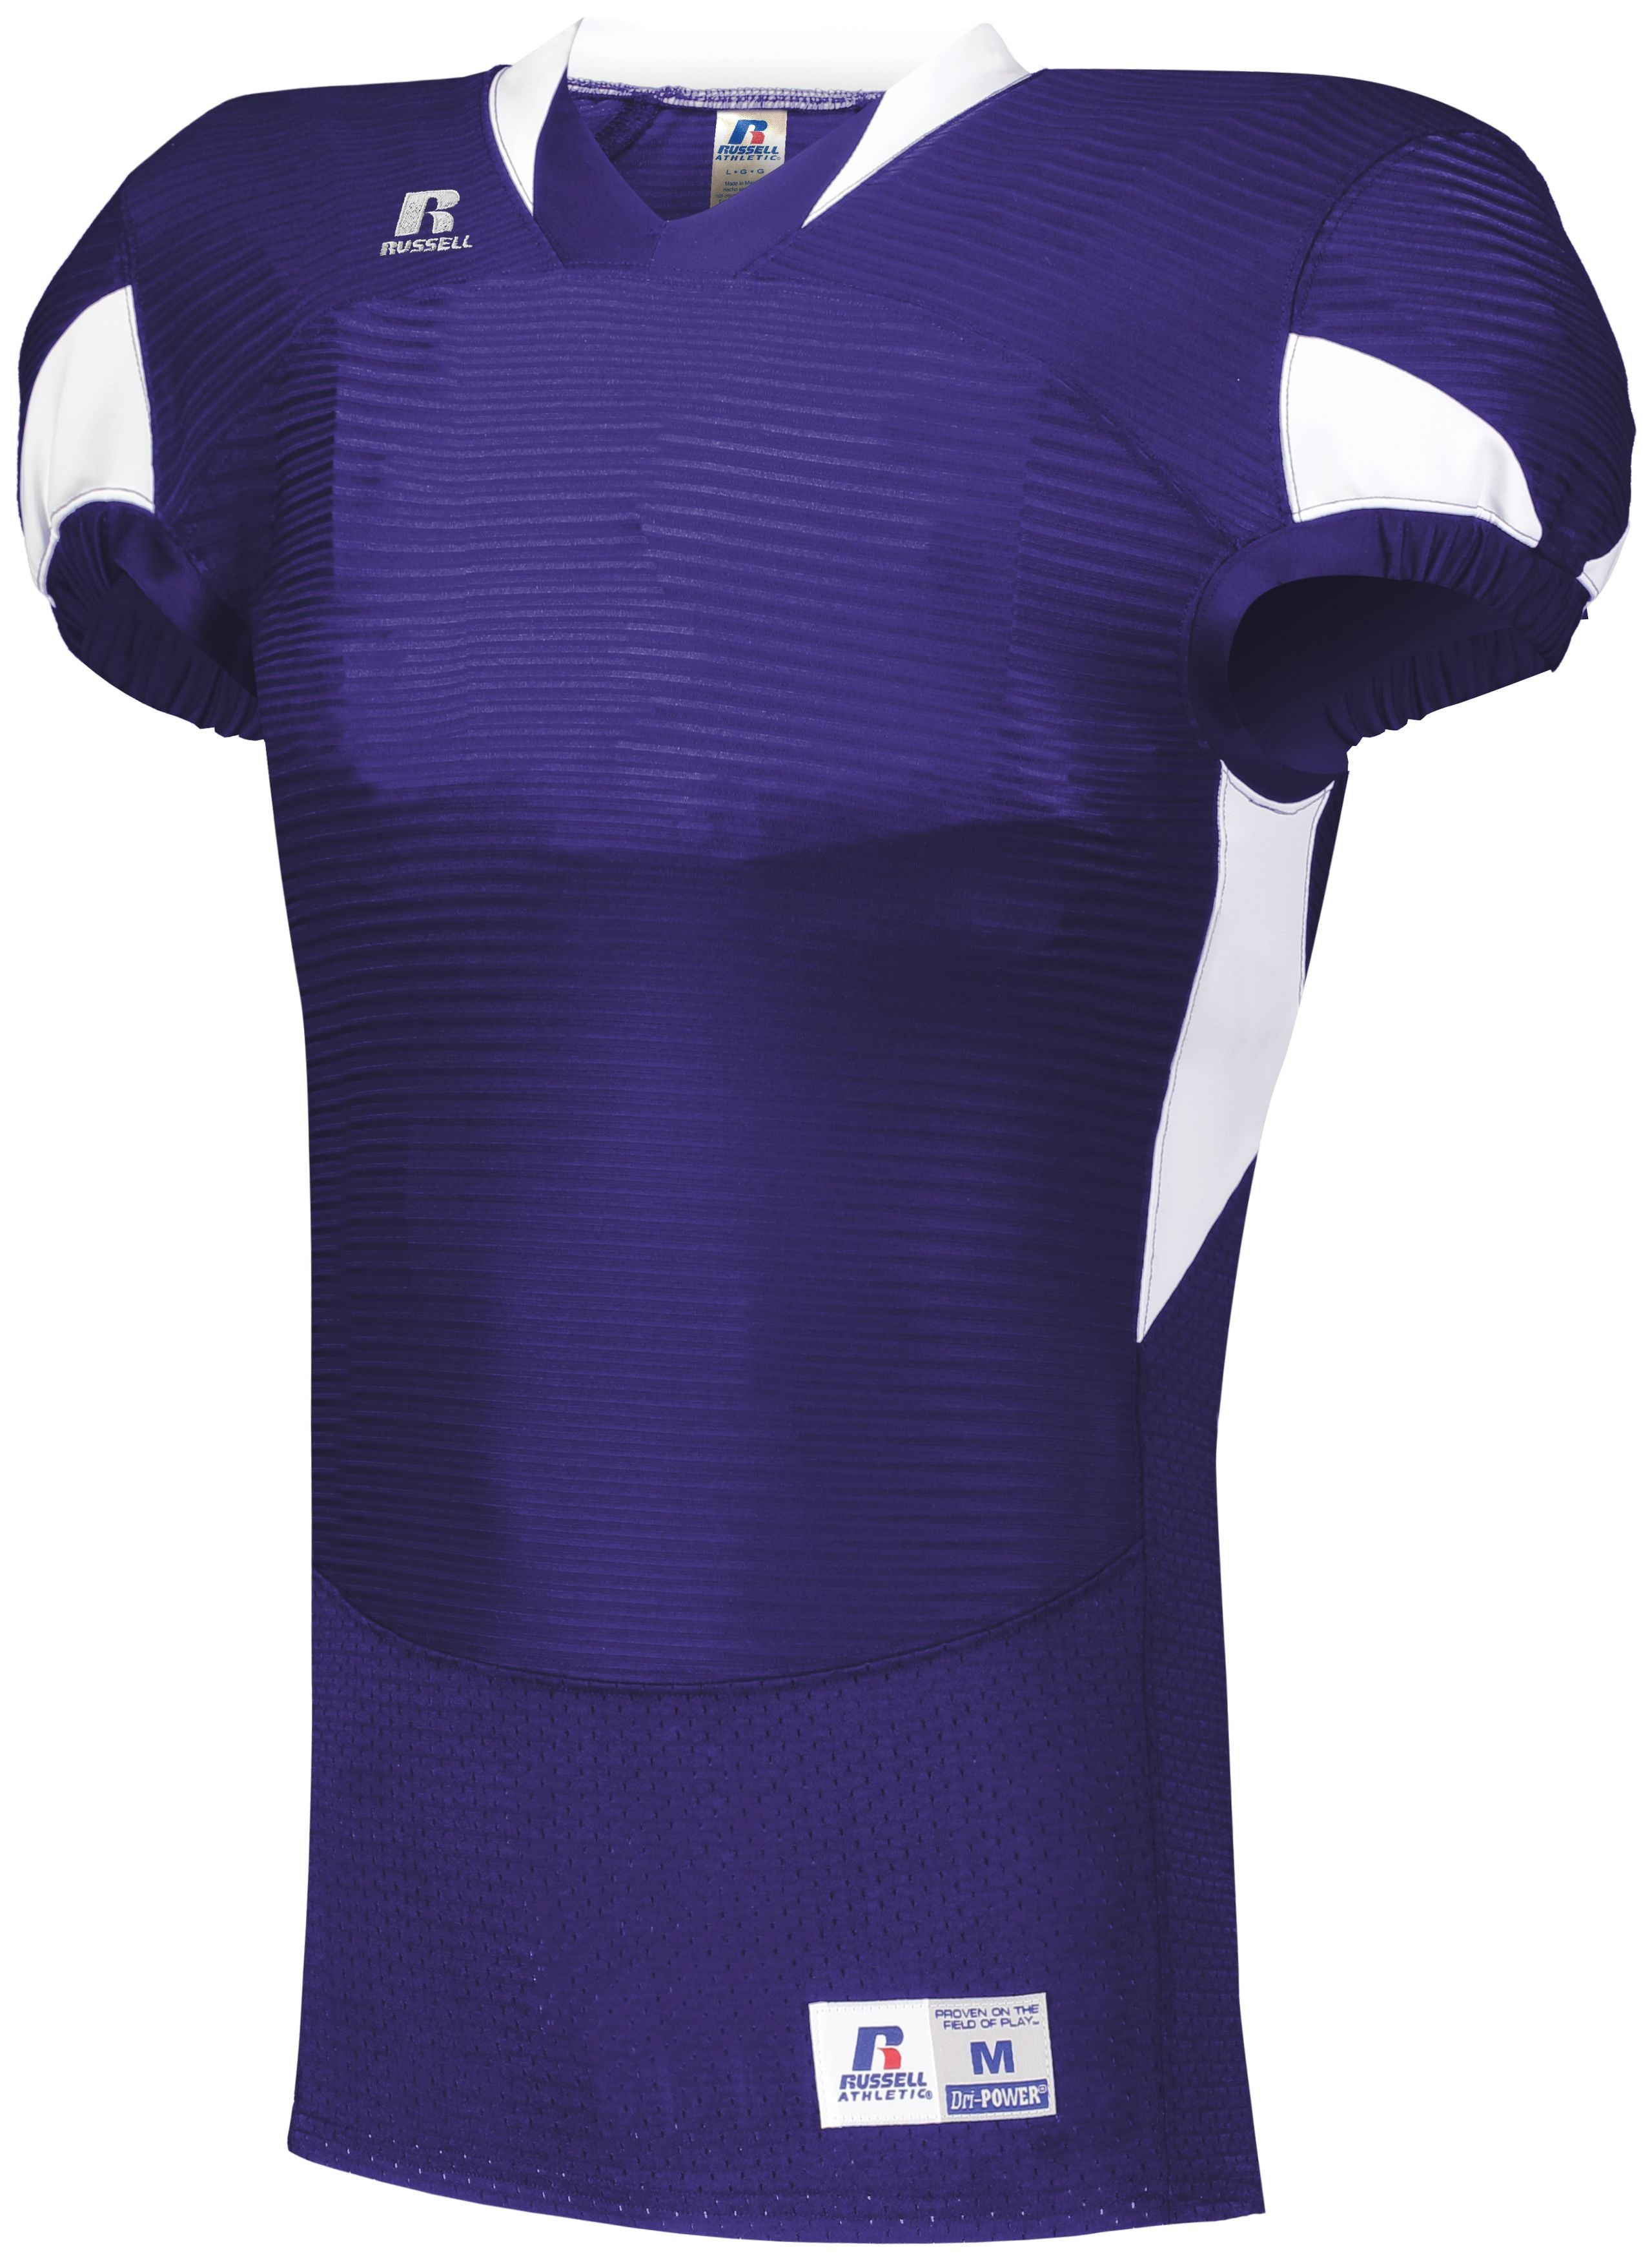 Russell Athletic Waist Length Football Jersey in Purple/White  -Part of the Adult, Adult-Jersey, Football, Russell-Athletic-Products, Shirts, All-Sports, All-Sports-1 product lines at KanaleyCreations.com